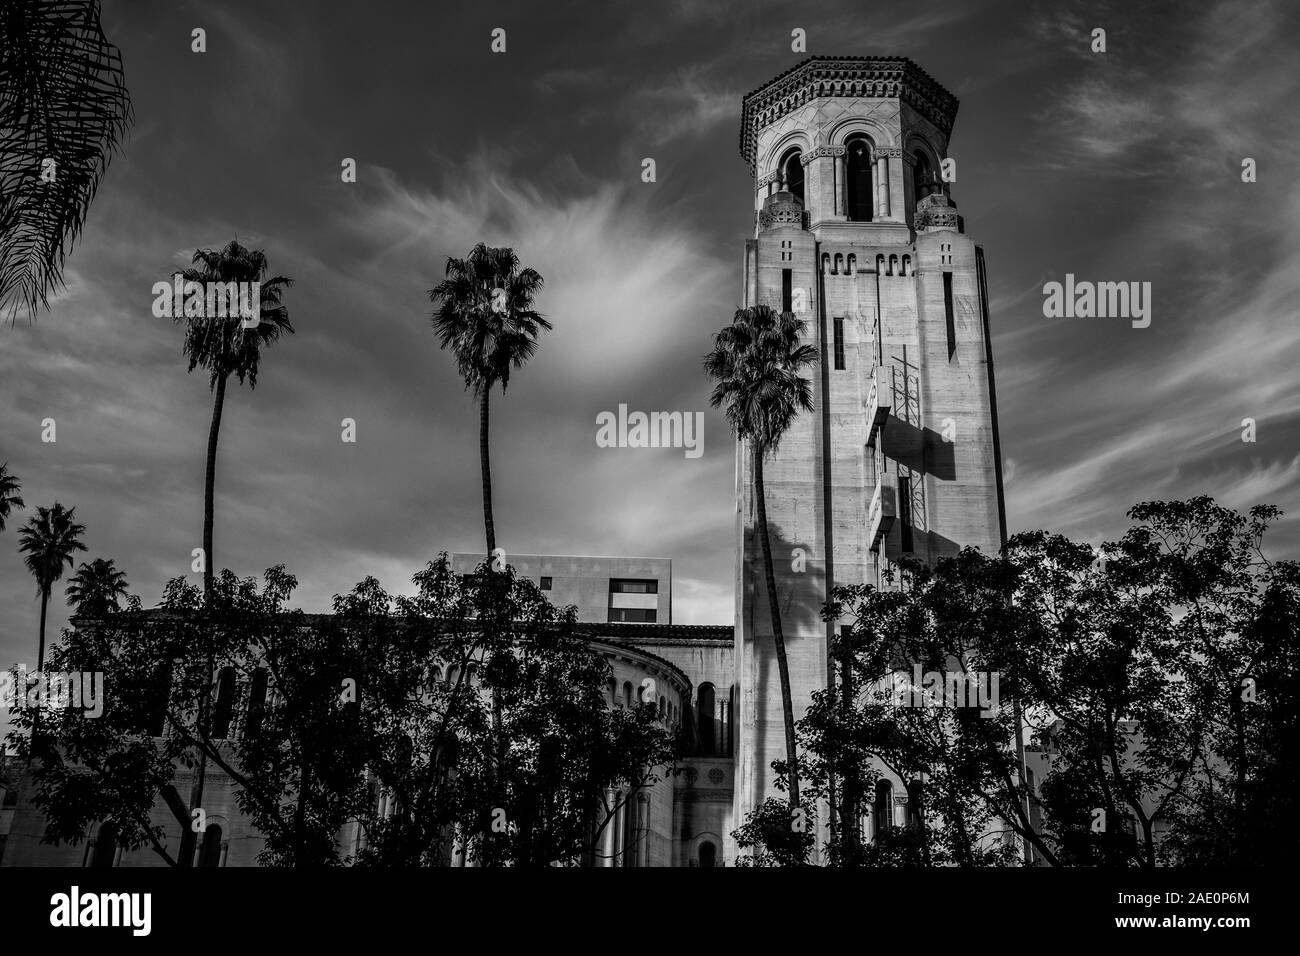 Los angeles Black and White Stock Photos & Images - Alamy